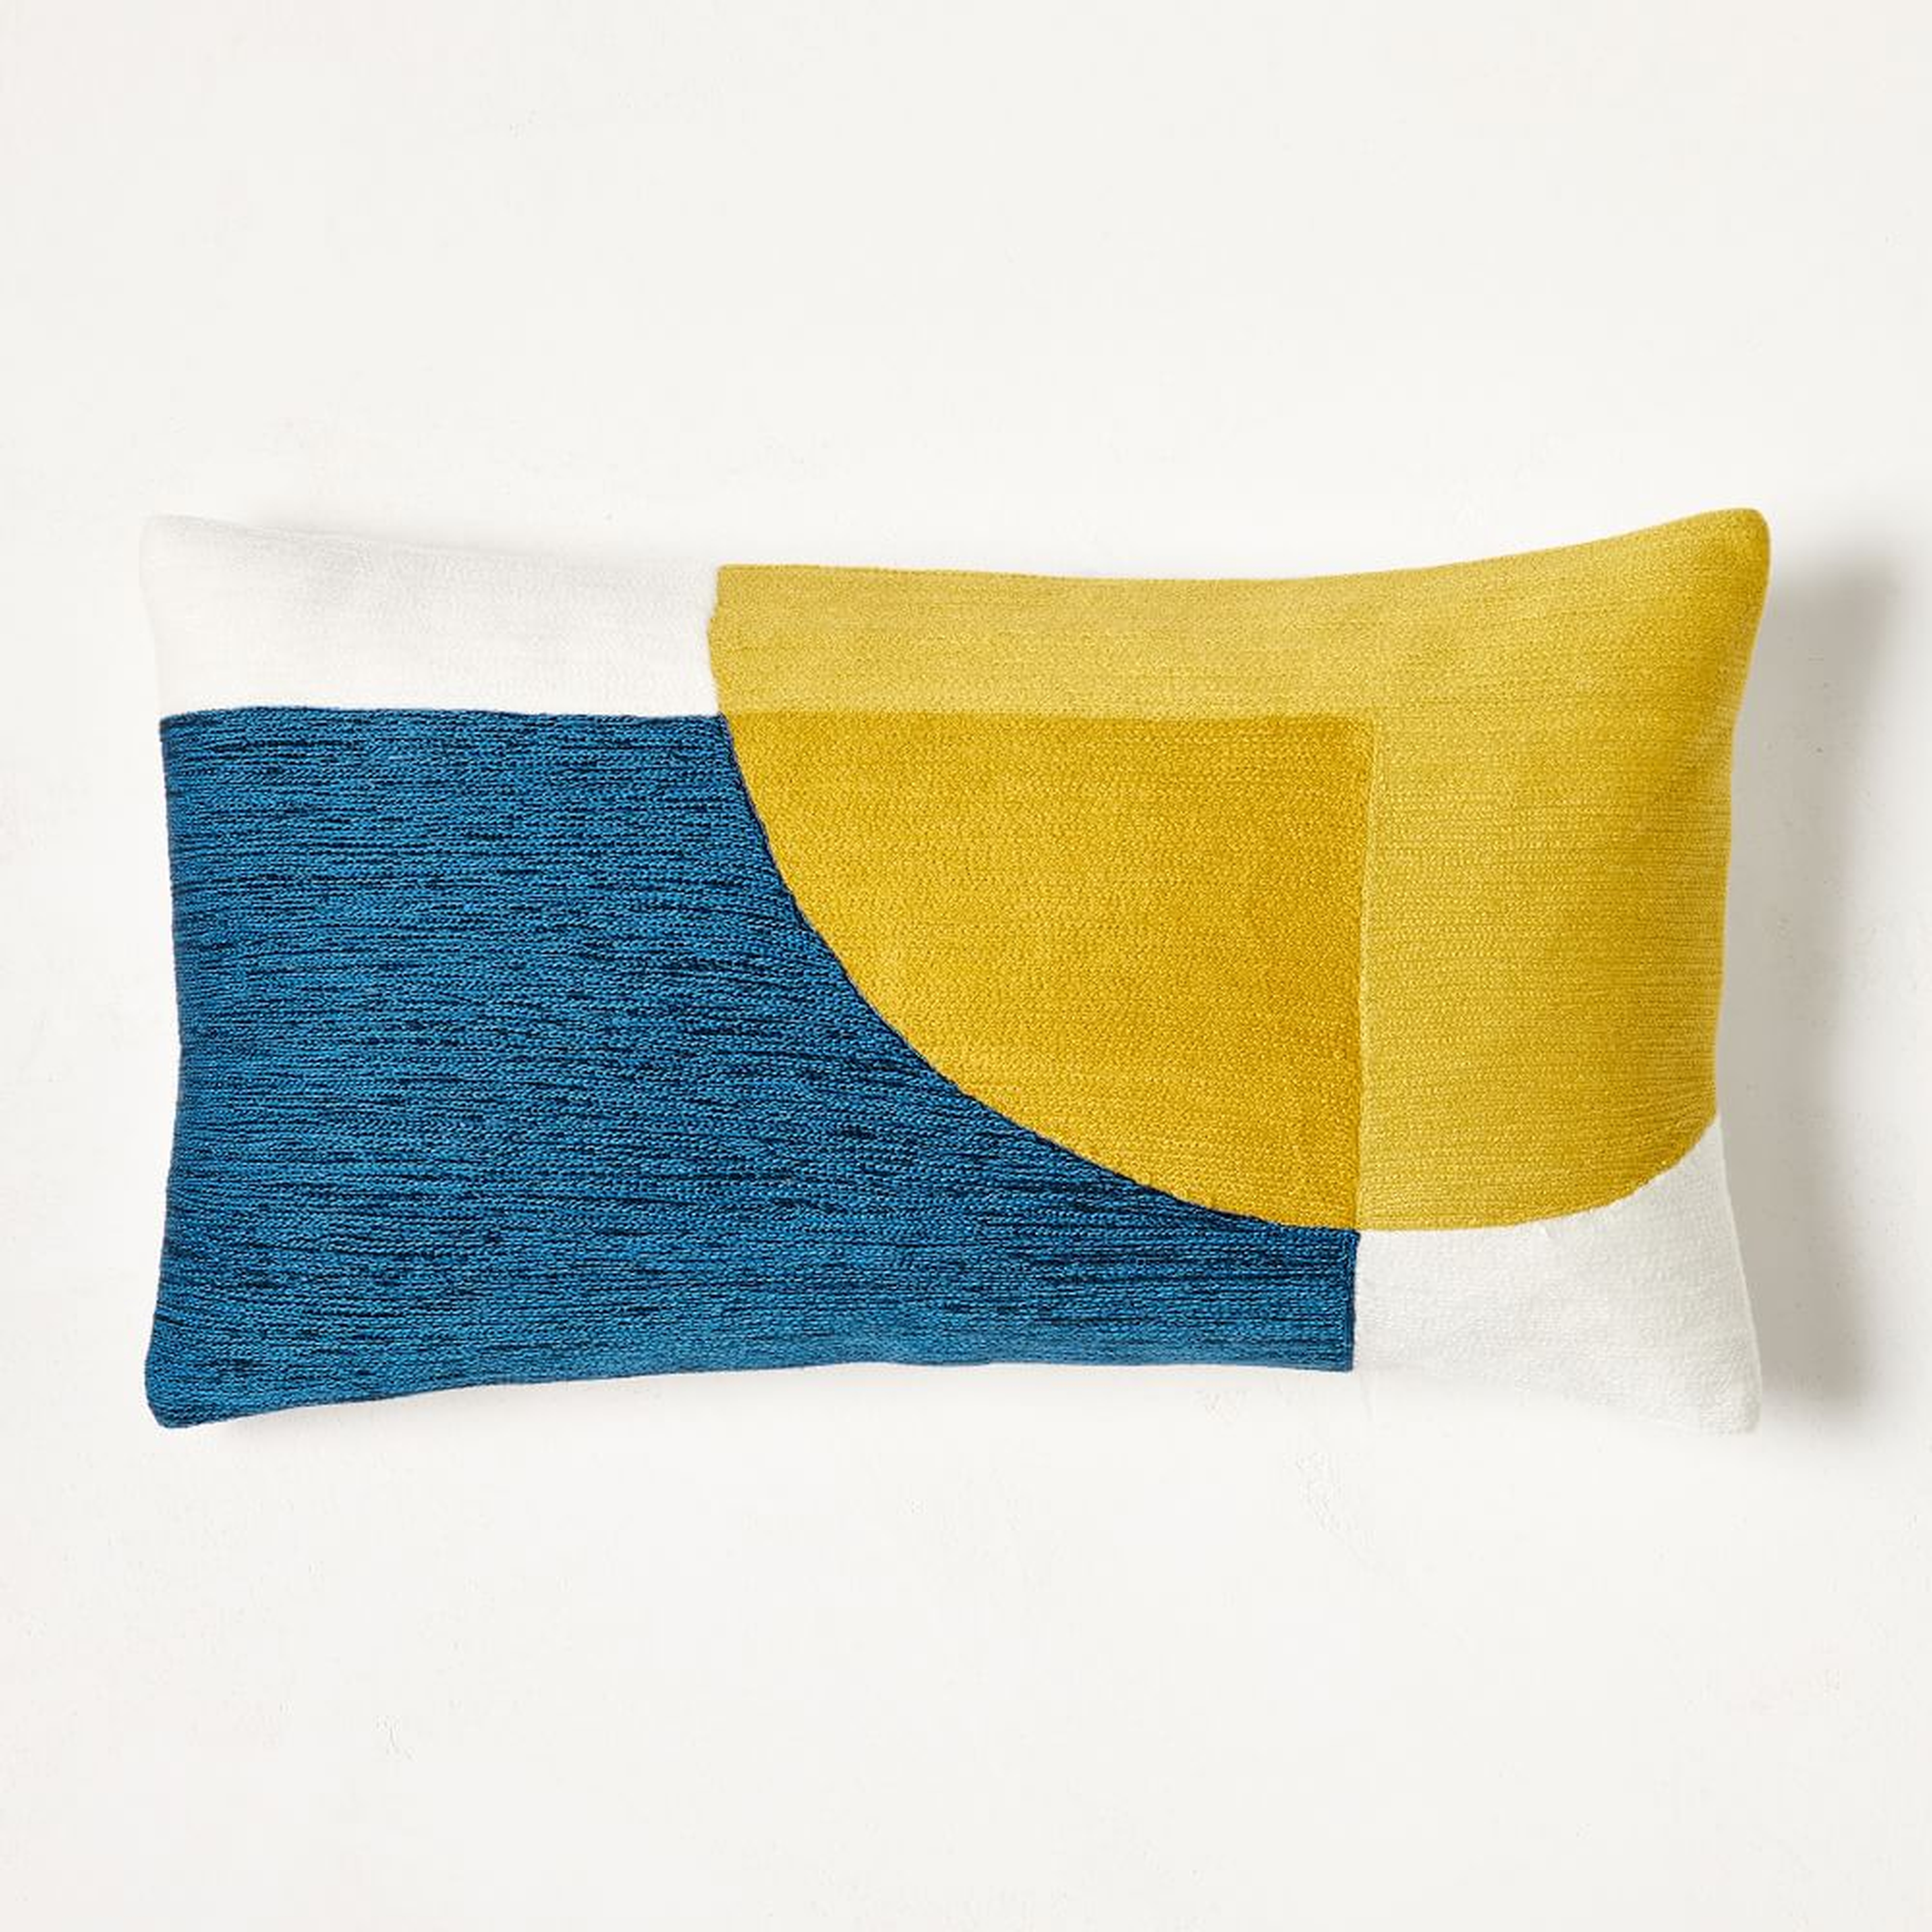 Crewel Overlapping Shapes Pillow Cover, 12"x21", Midnight - West Elm